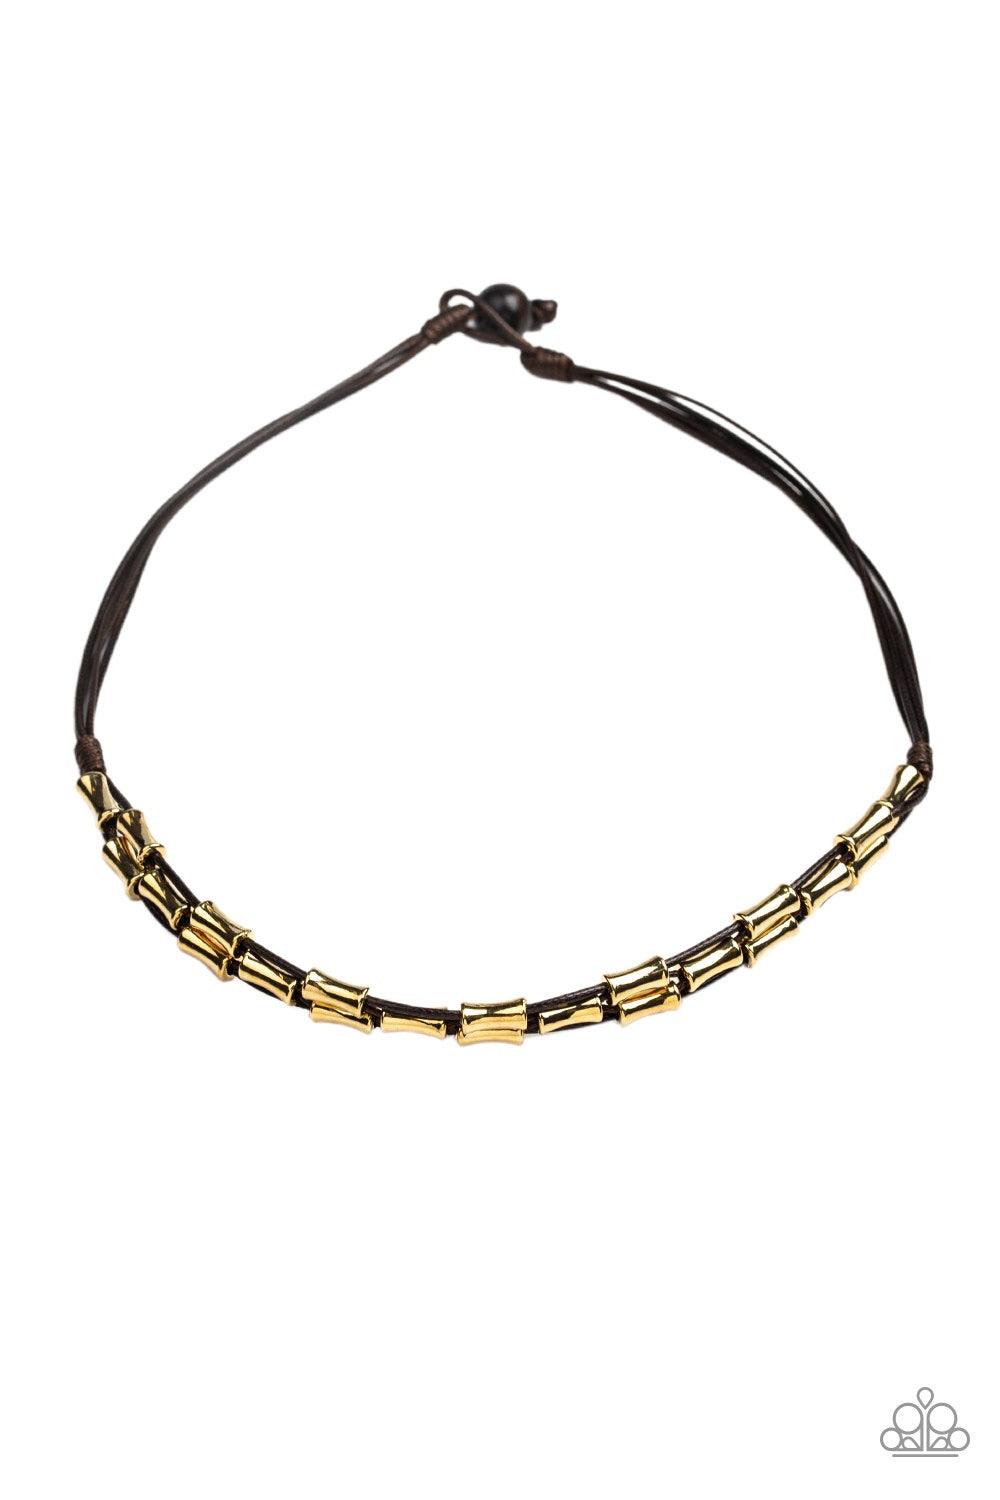 Paparazzi Accessories Moto Maverick - Brown Shiny brown cording weaves through a collection of glistening gold beads below the collar for an edgy, urban look. Features a button loop closure. Jewelry